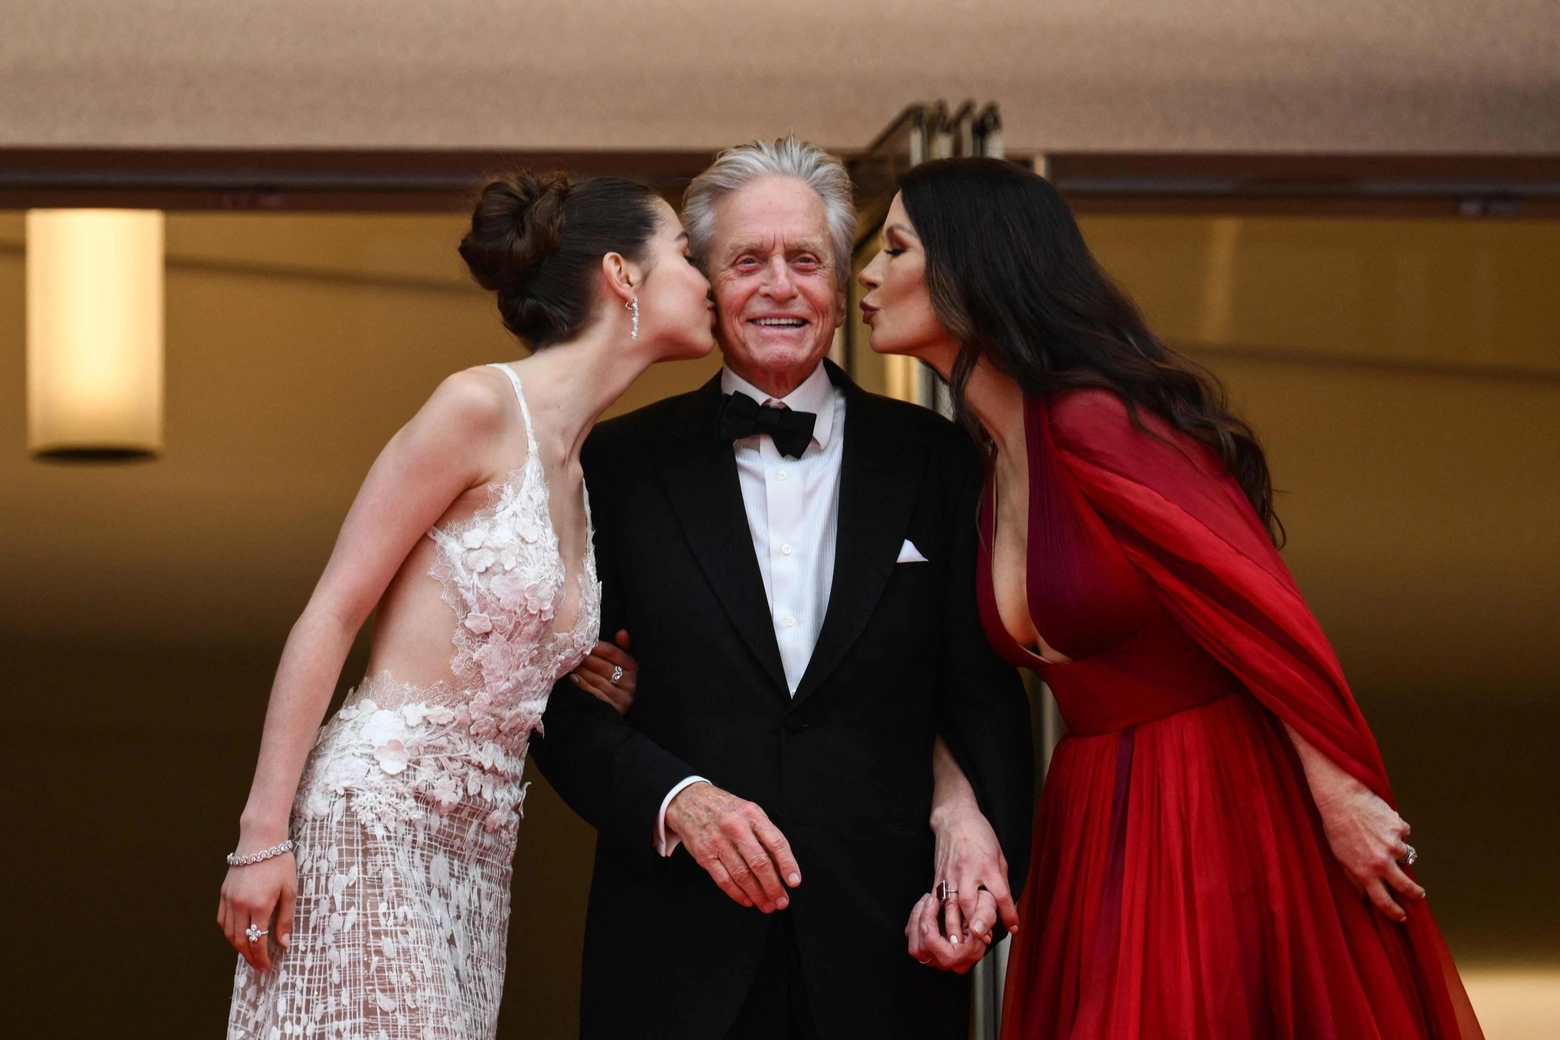 British actress Catherine Zeta-Jones (R) and her daughter Carys kiss US actor and Honorary Palme d’or of the 76th Festival de Cannes Michael Douglas as they arrive for the opening ceremony and the screening of the film "Jeanne du Barry" during the 76th edition of the Cannes Film Festival in Cannes, southern France, on May 16, 2023. (Photo by CHRISTOPHE SIMON / AFP)